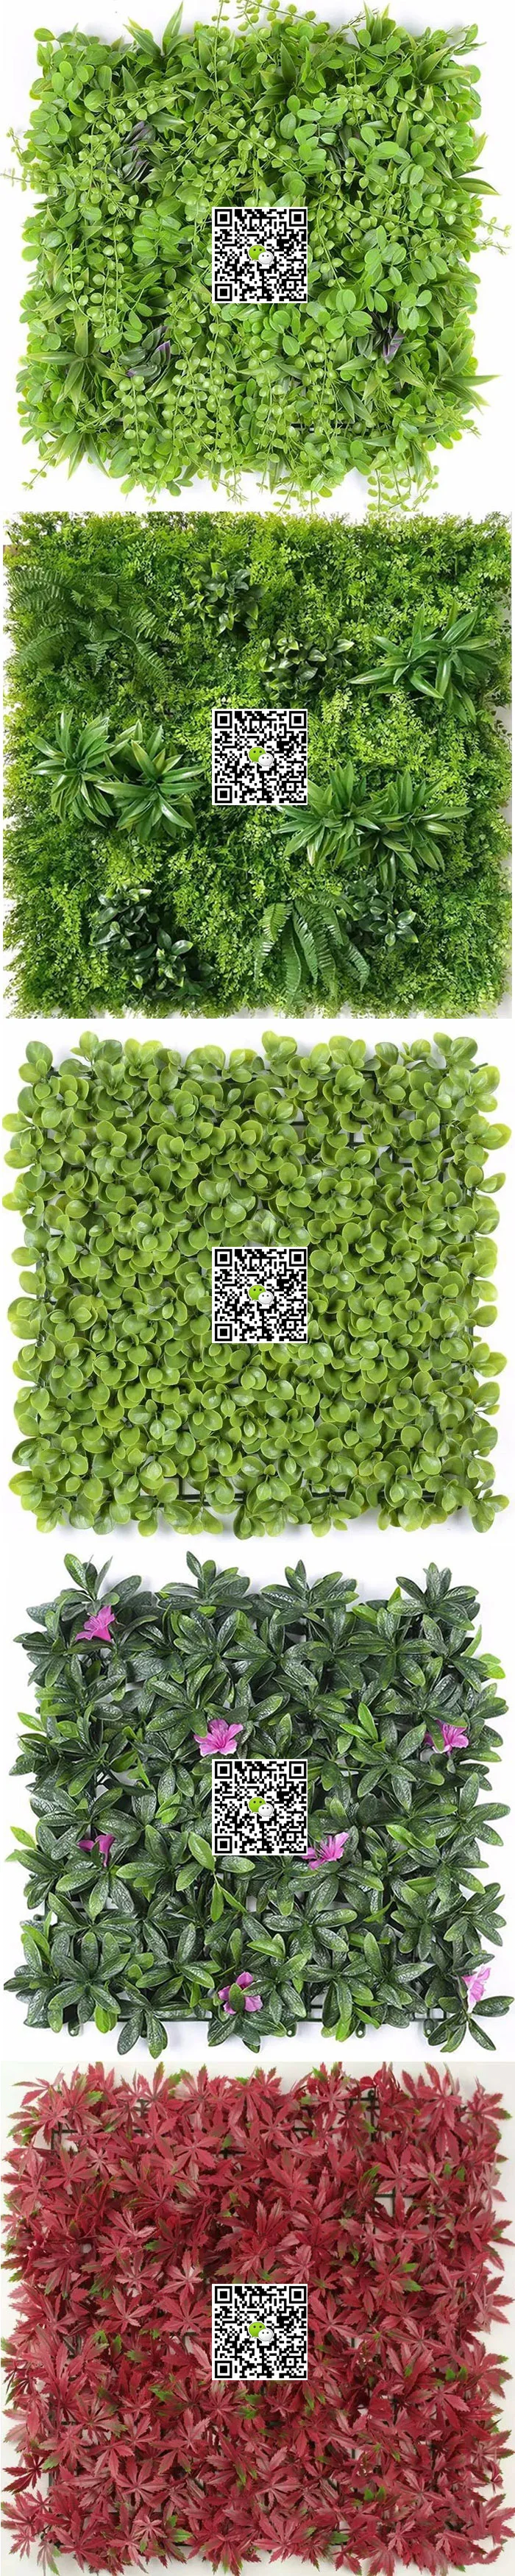 Anti-UV Natural Looking Artificial Grass Turf Green Wall Synthetic Plant Foliage Vertical Garden for Landscape Planting